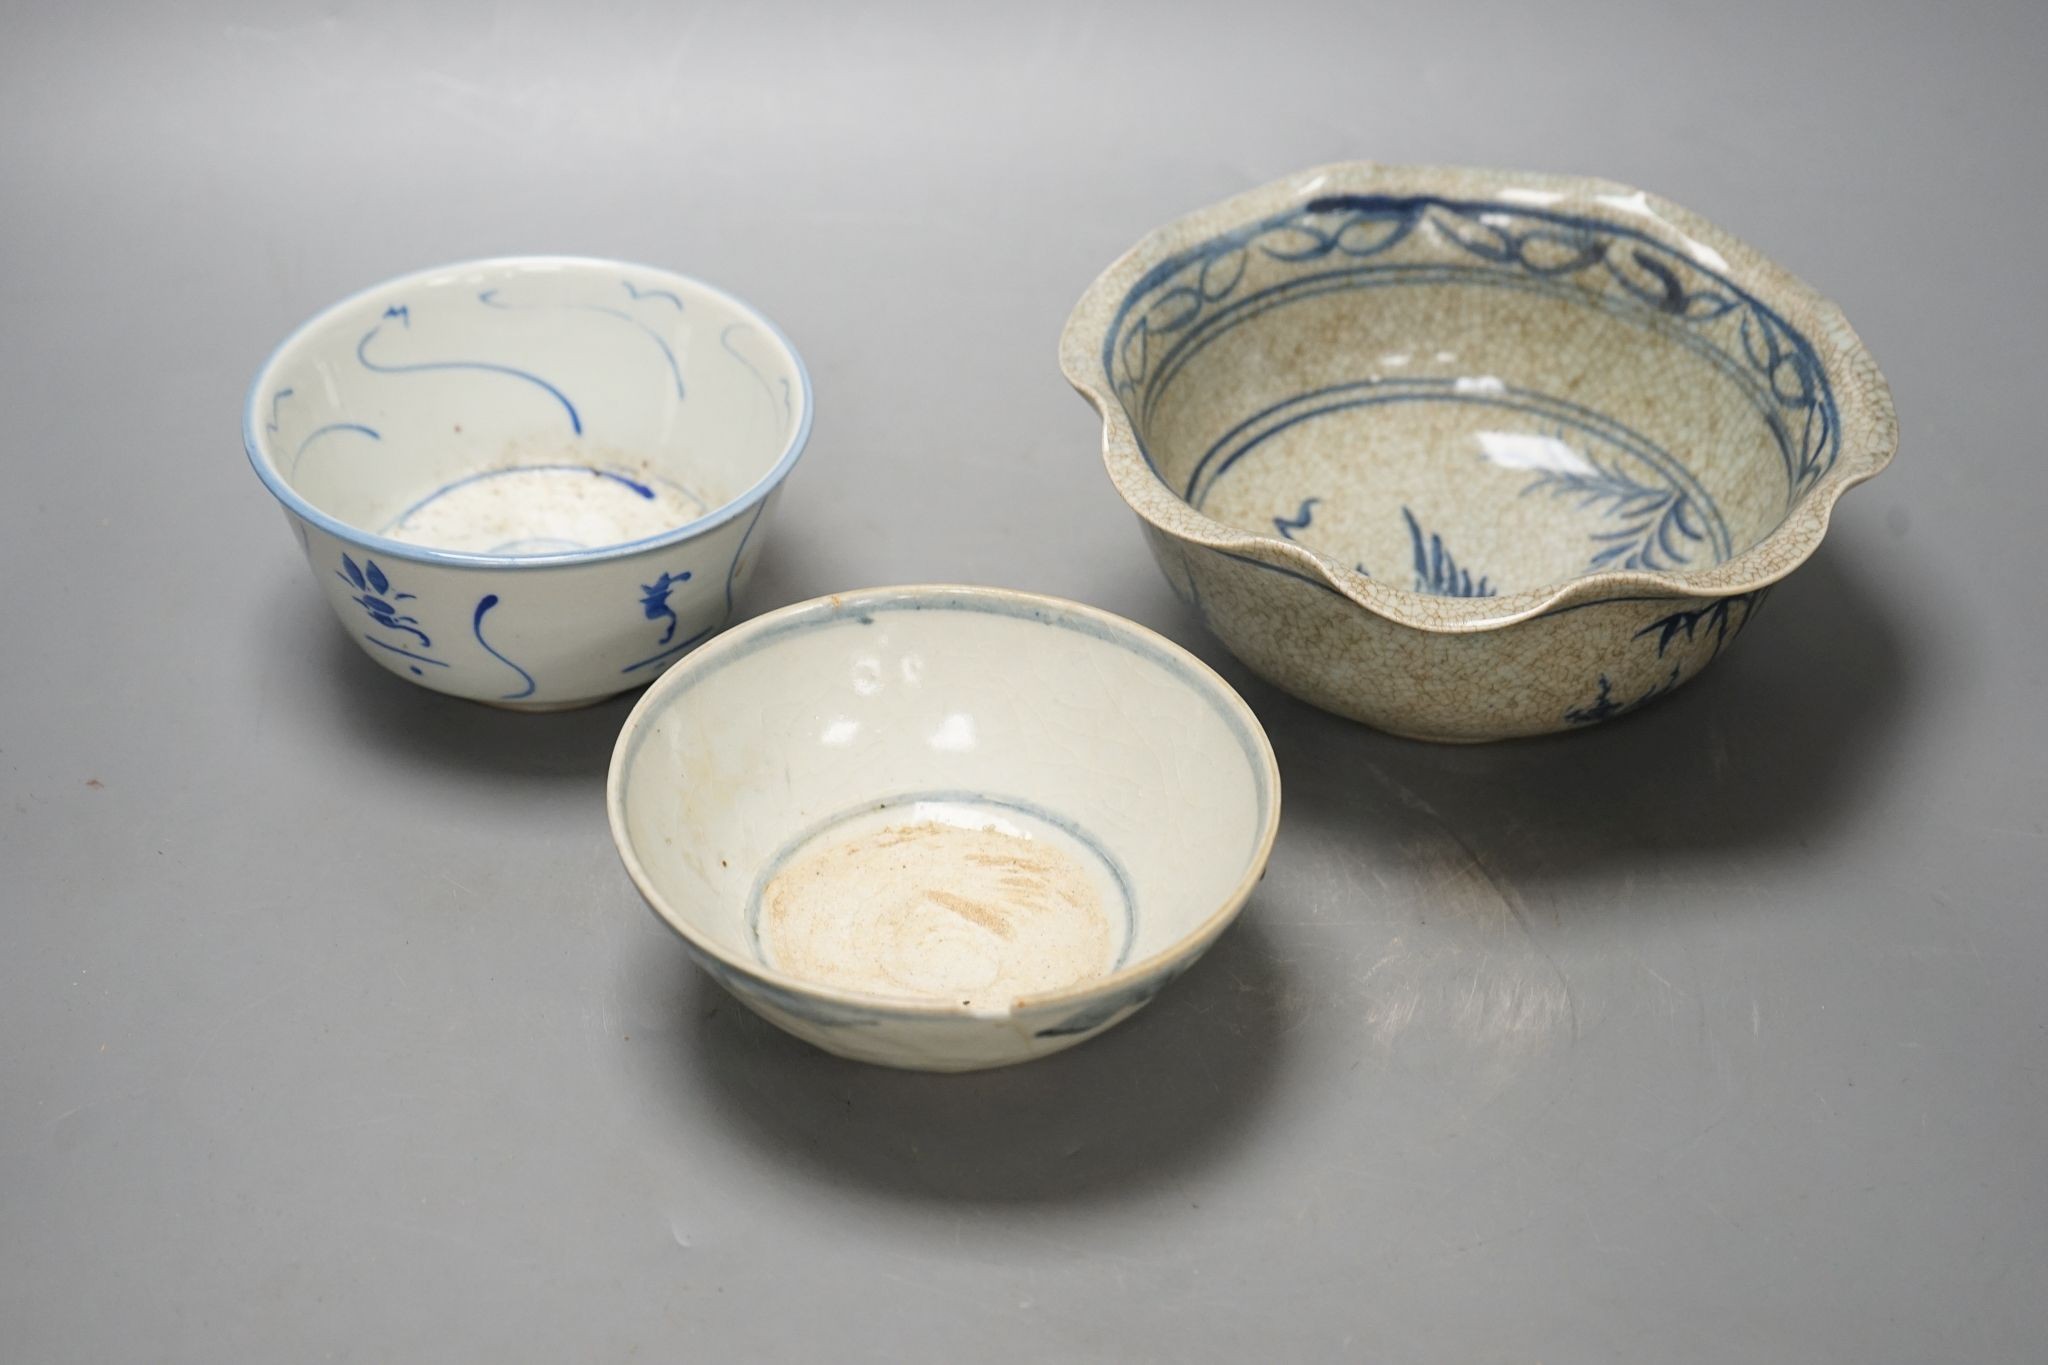 Three Chinese porcelain blue and white bowls, largest 17cm. diam.